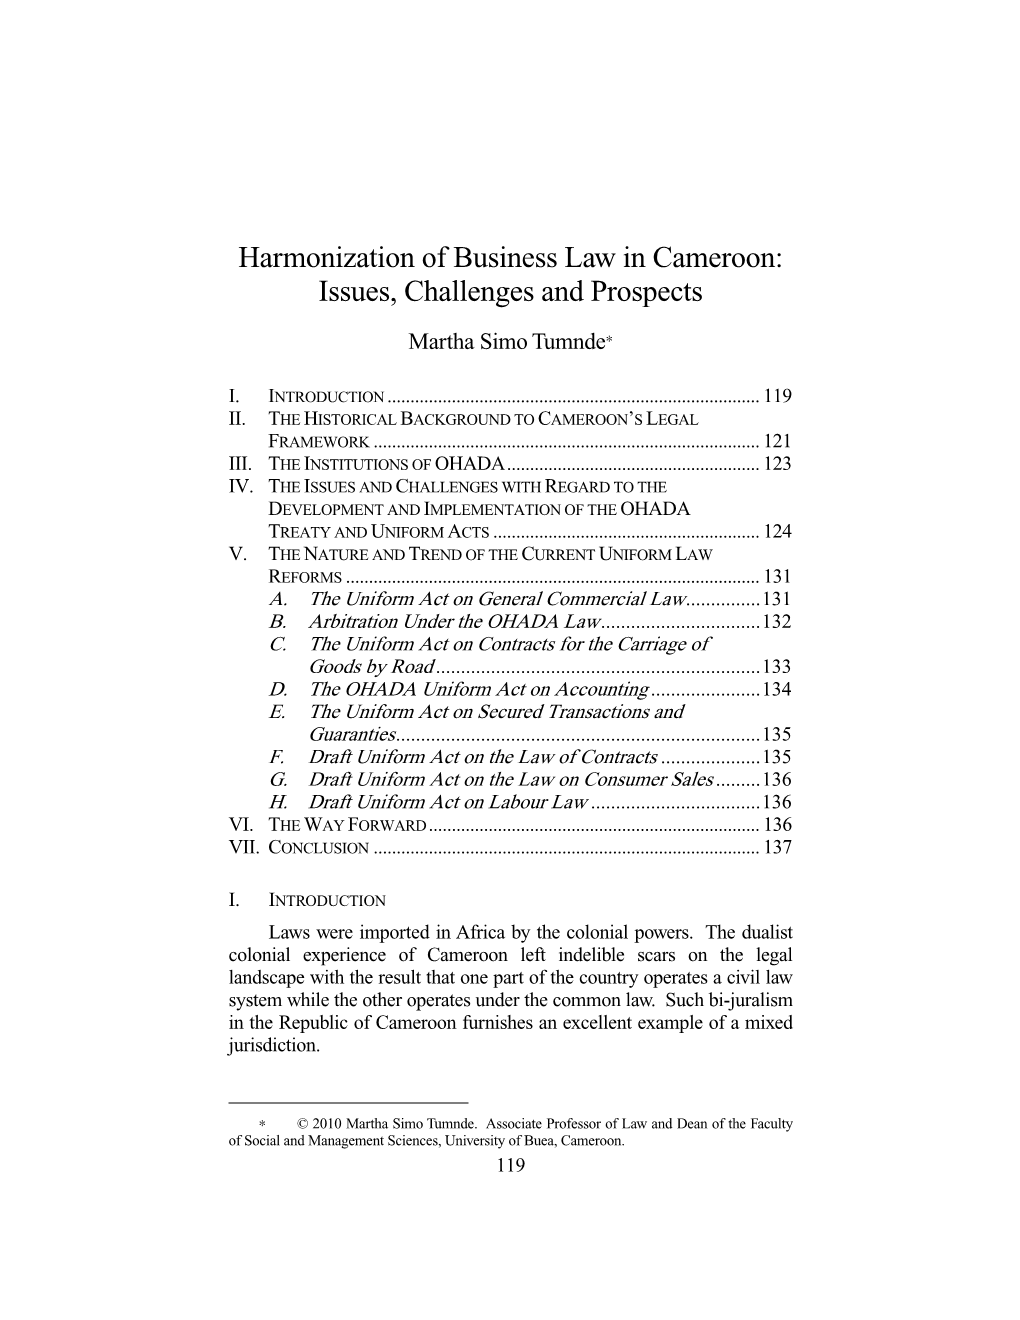 Harmonization of Business Law in Cameroon: Issues, Challenges and Prospects